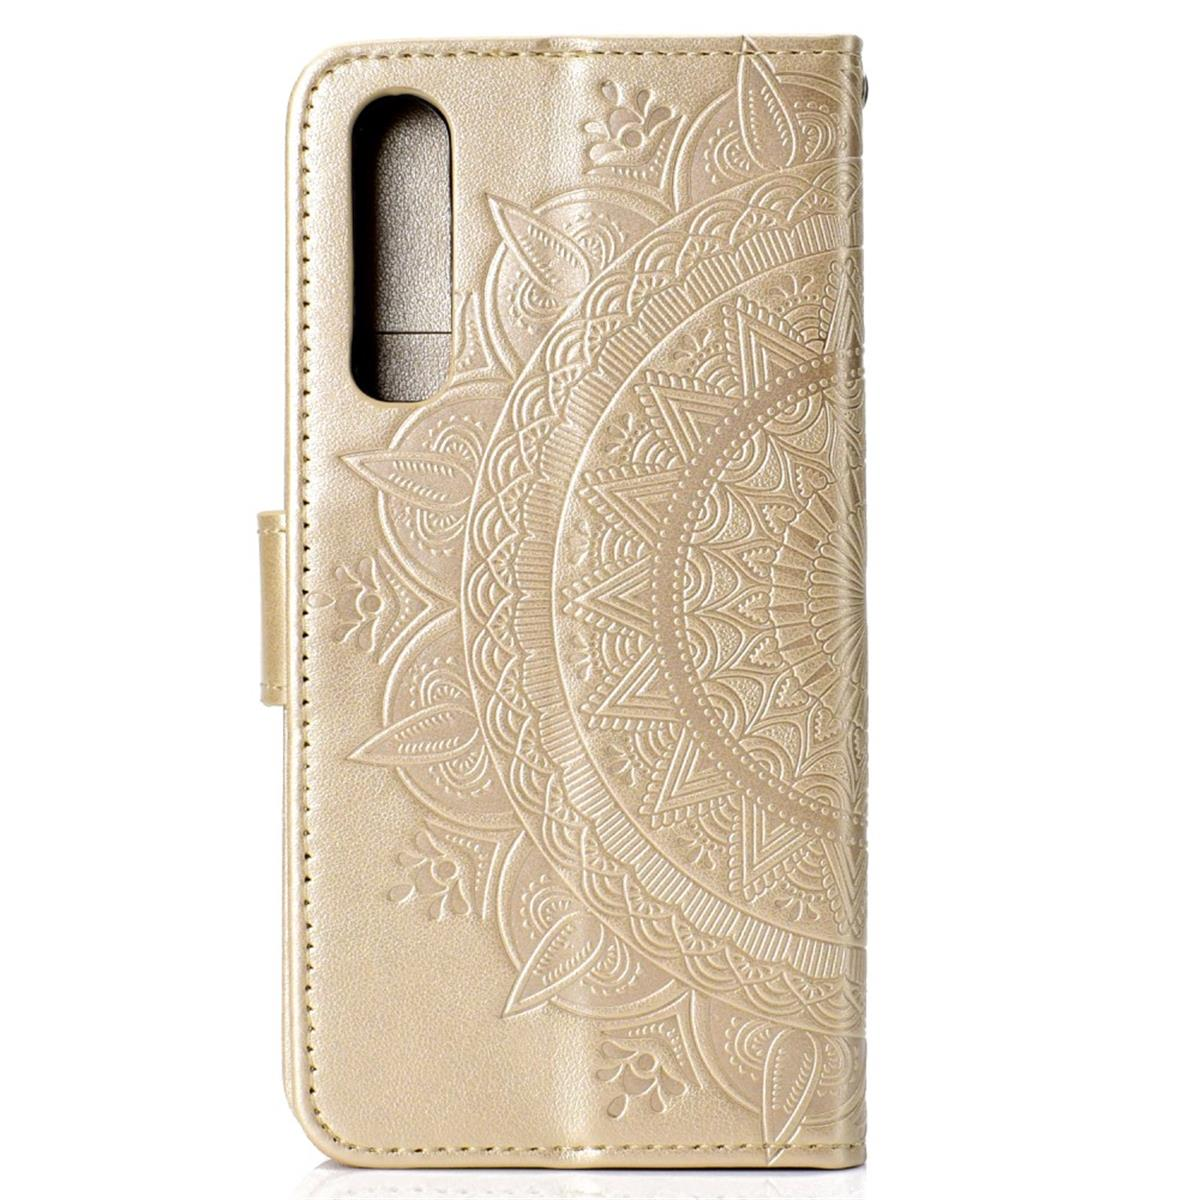 COVERKINGZ Klapphülle Gold P30, mit Bookcover, Mandala Muster, Huawei,